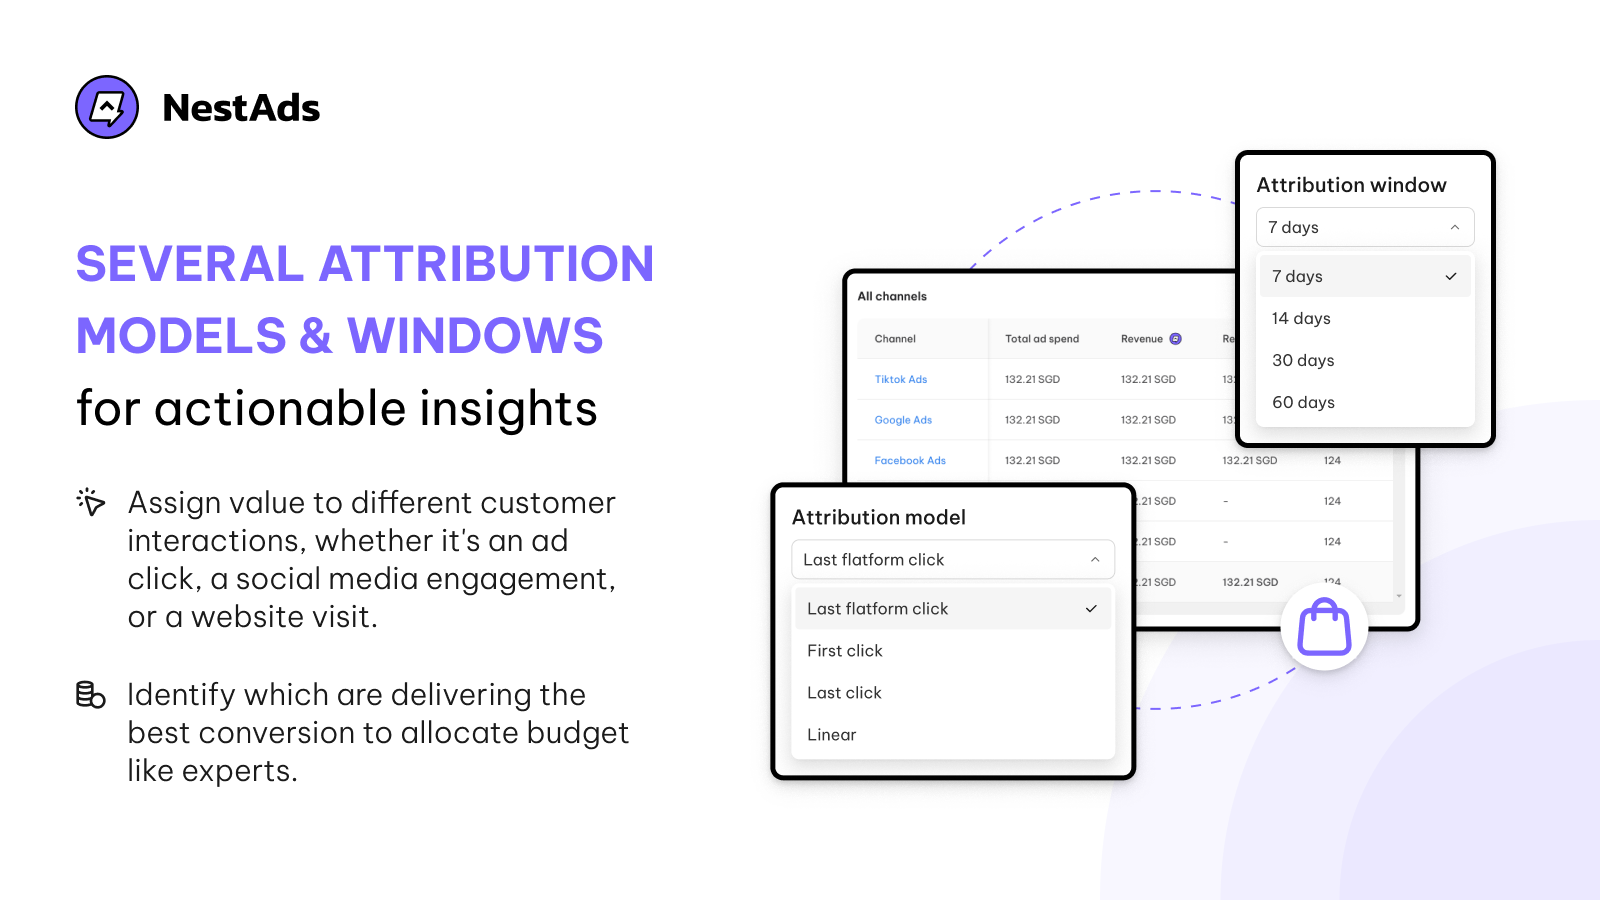 Several attribution models & windows for actionable insights